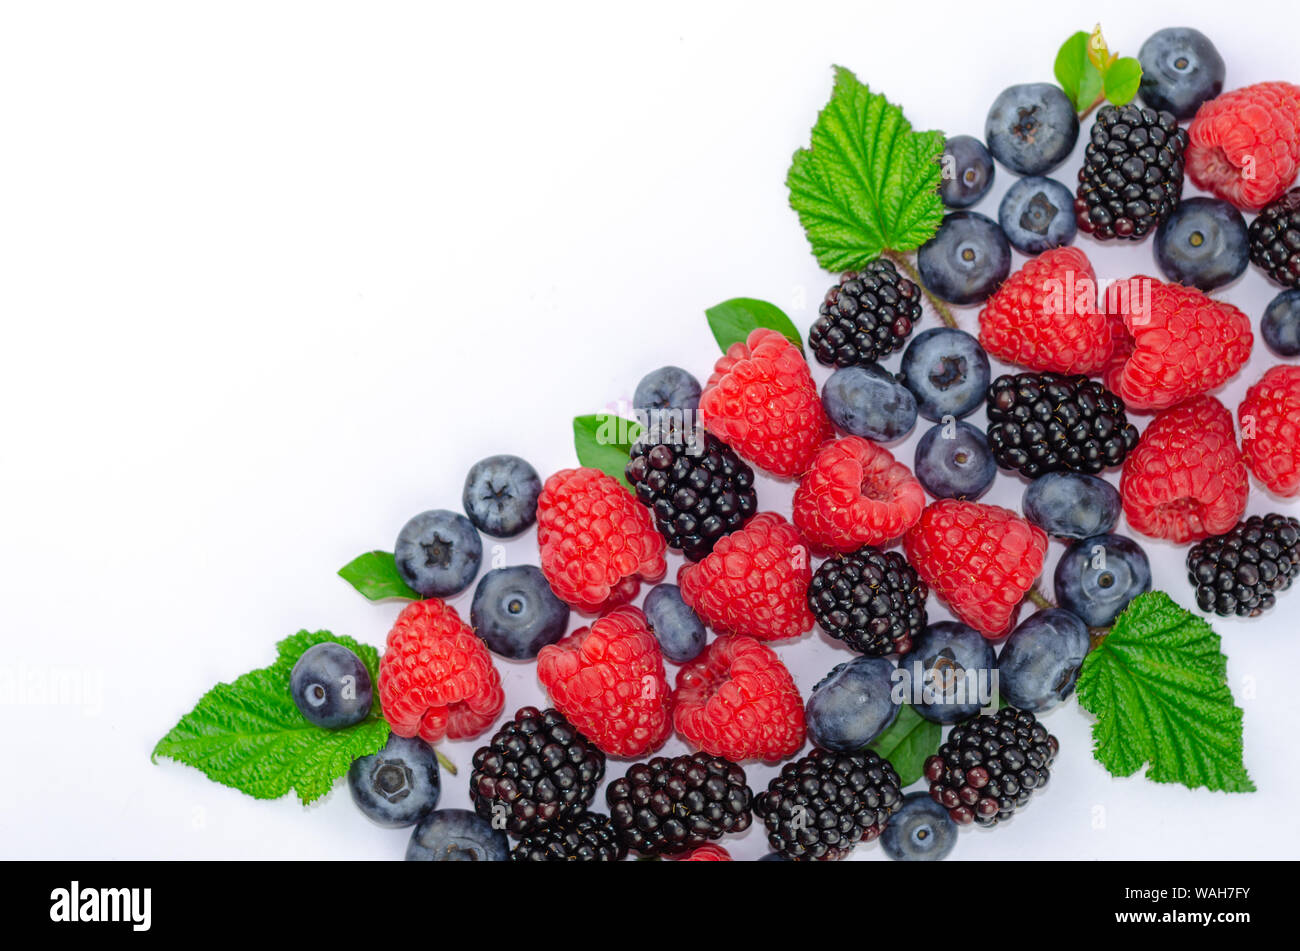 Blueberries, blackberries, raspberries and green leaves isolated on white - flat lay photo with a copy space. Stock Photo